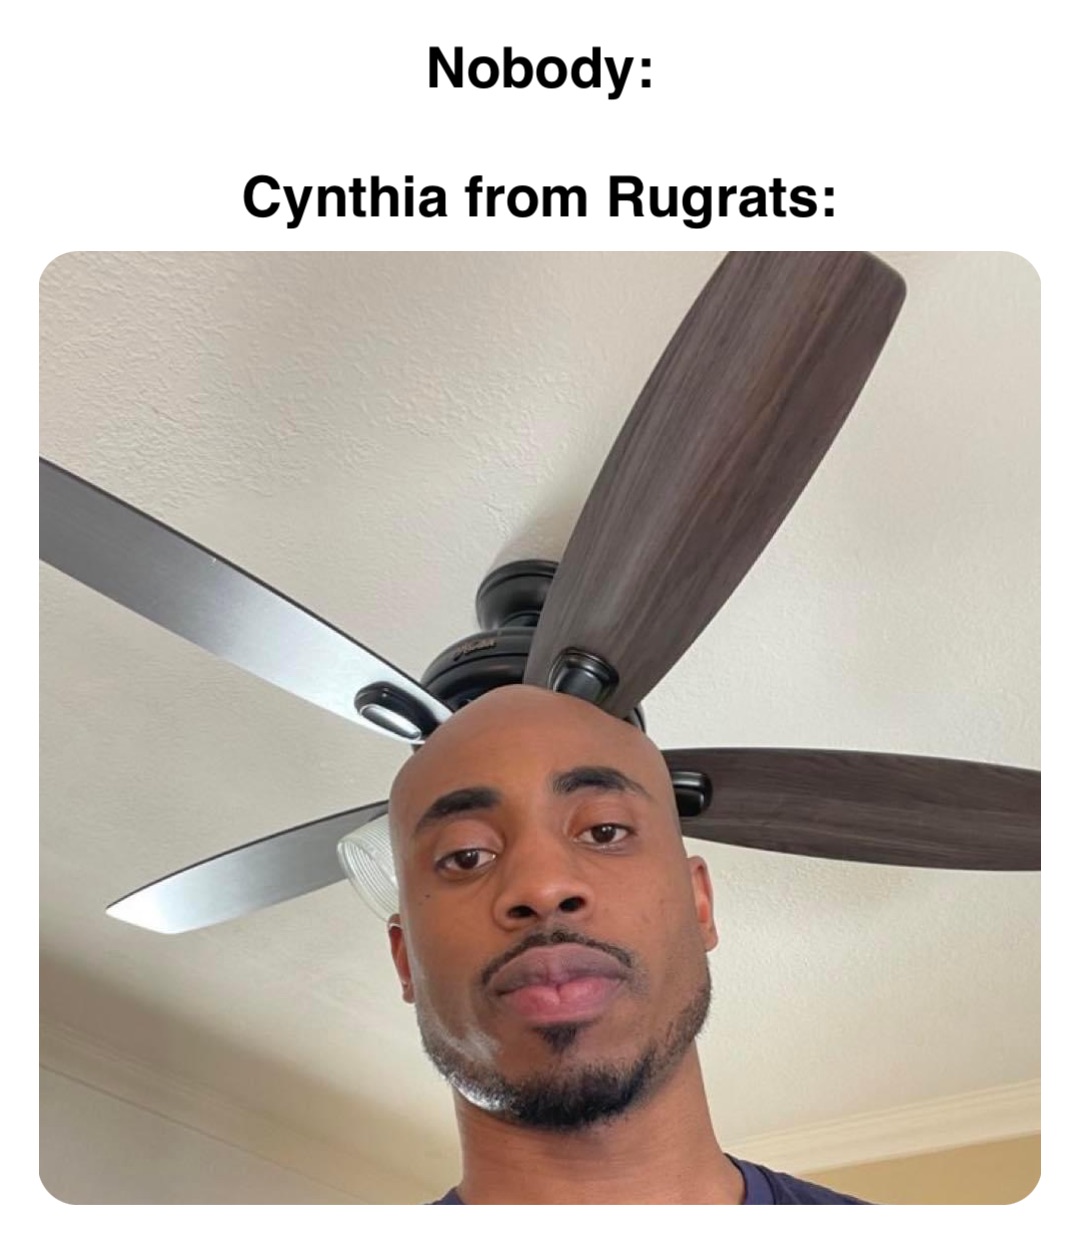 Double tap to edit Nobody:

Cynthia from Rugrats: